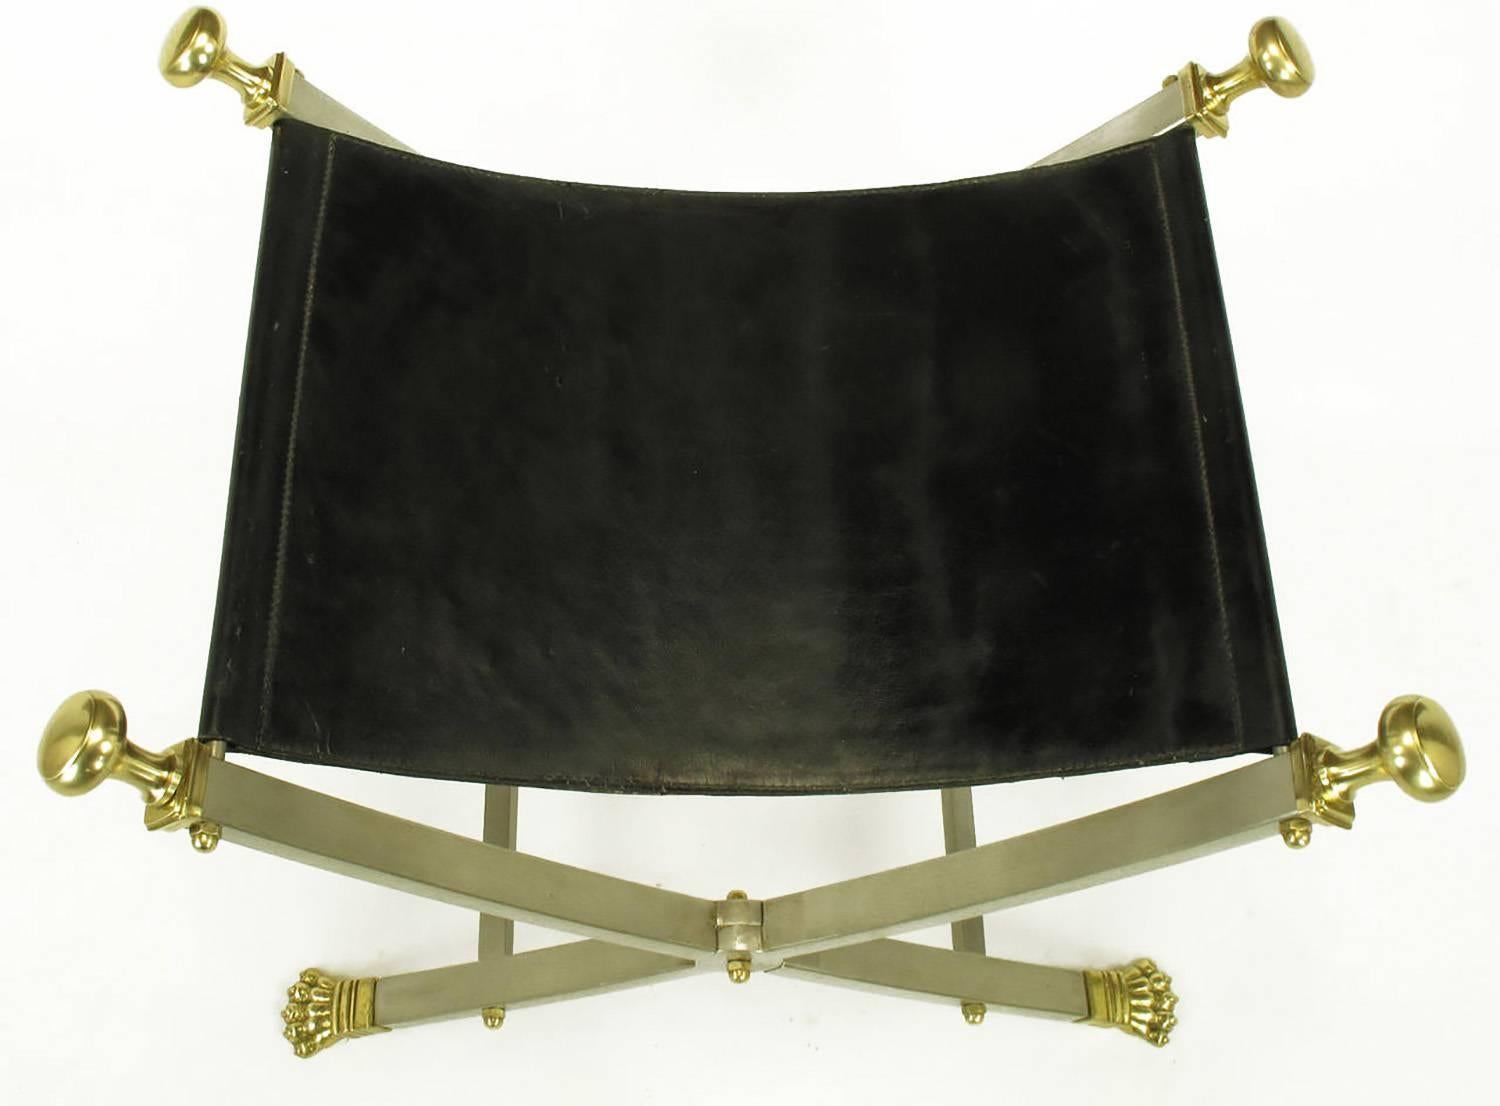 Pair of Maison Jansen Black Leather, Brass and Brushed Nickel Benches (Leder)